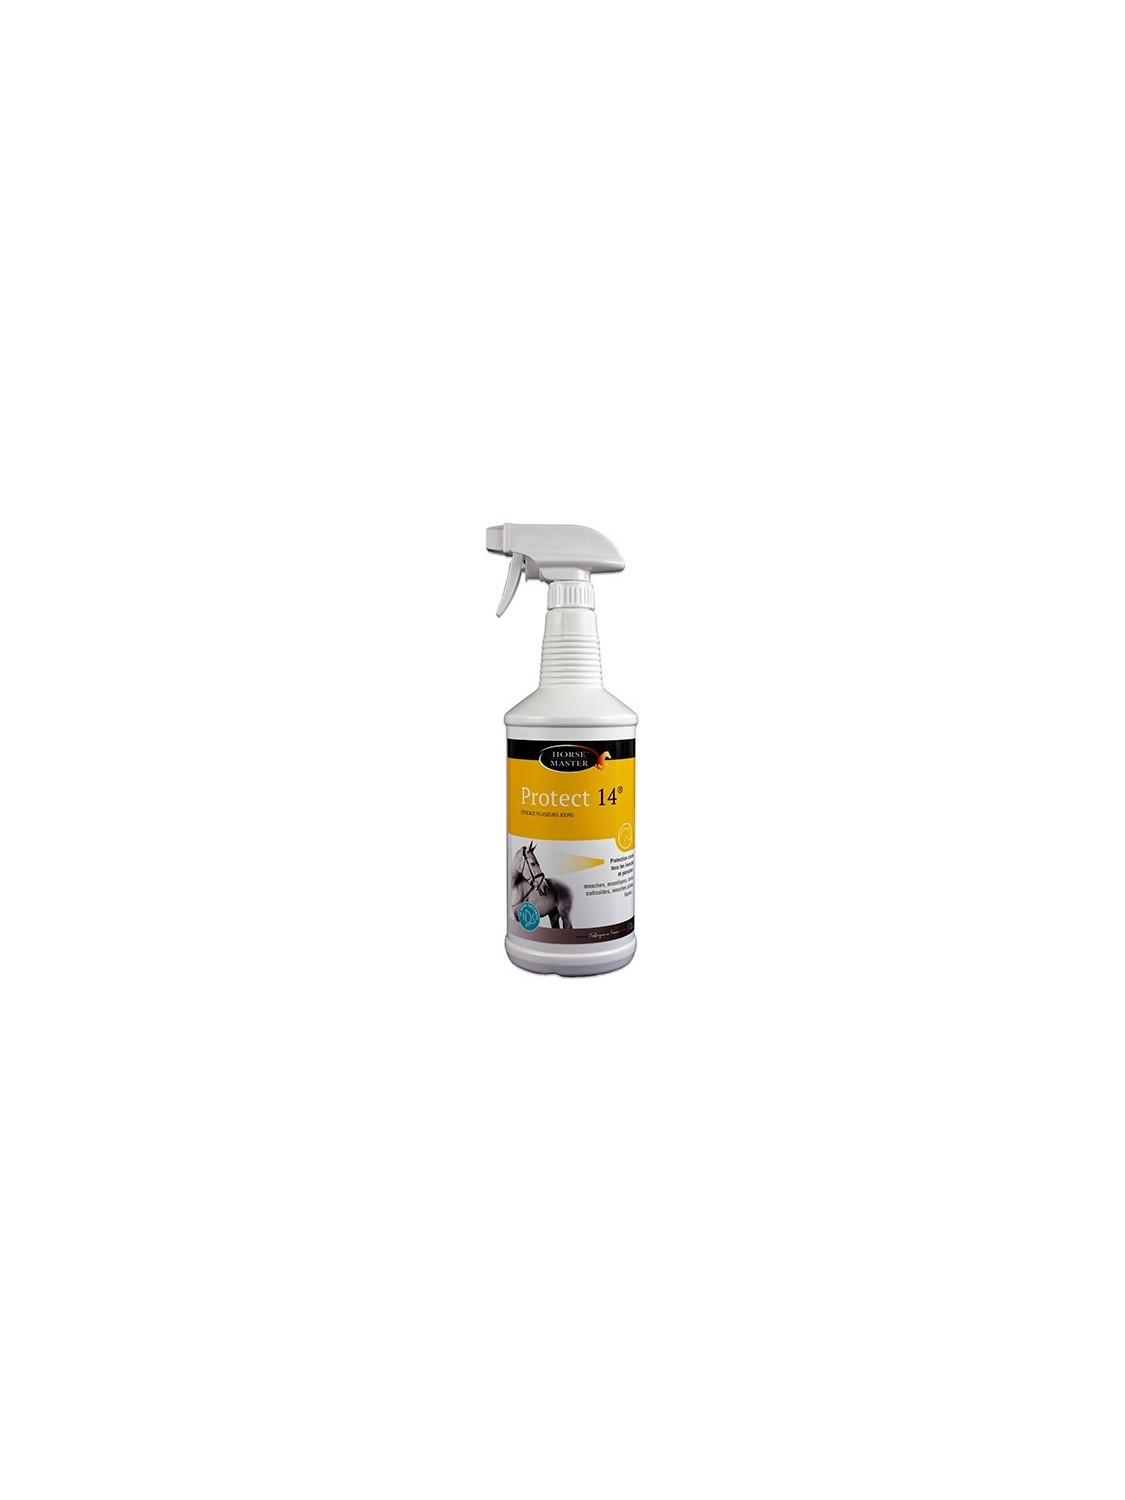 SPRAY ANTIMOUCHES ET INSECTES PROTECT 14 1L